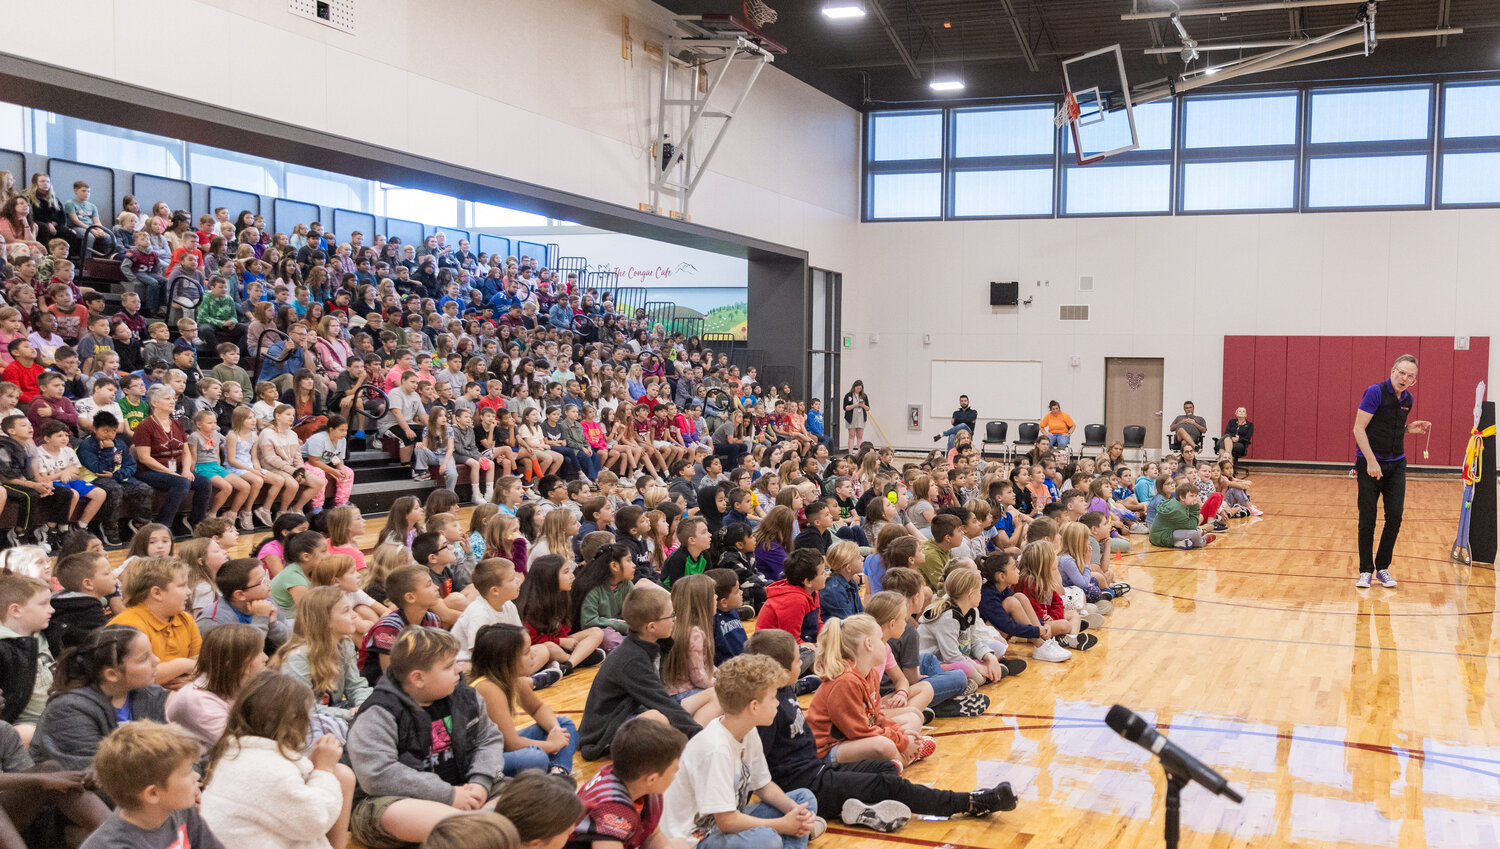 Paul, a professional yo-yo player, brings NED’s Mindset Mission to Orin C. Smith Elementary School in Chehalis on Friday, Sept. 15.